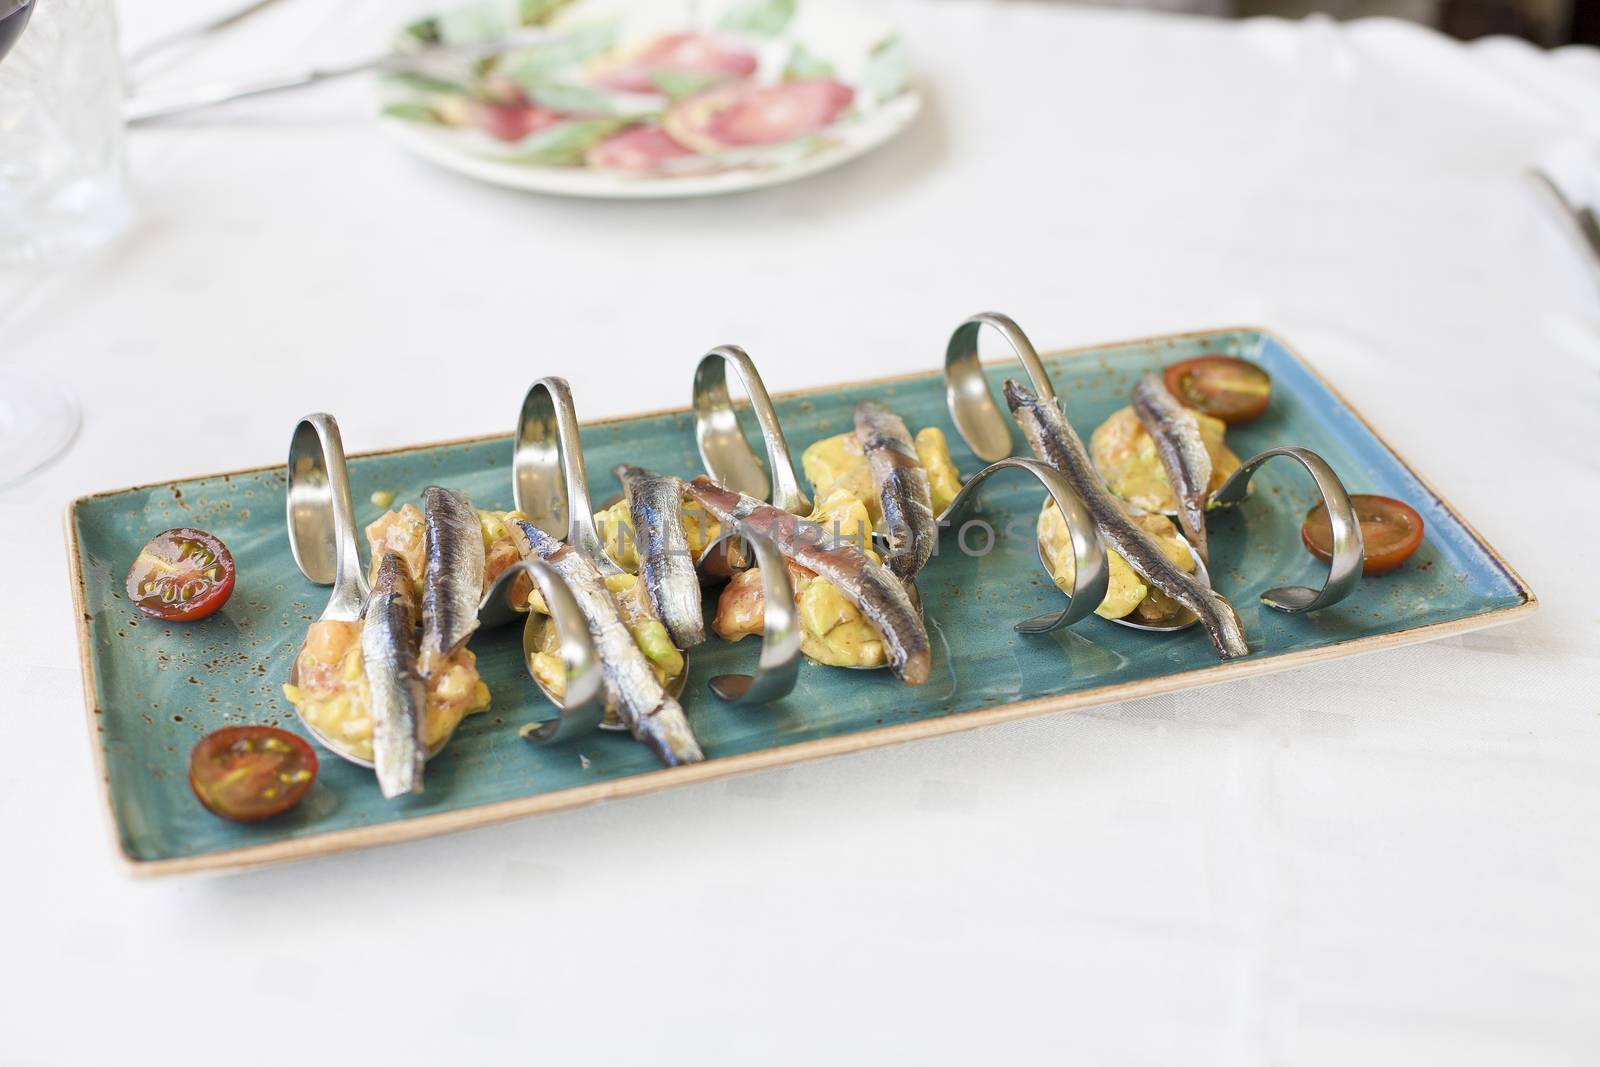 anchovies with guacamole and tomato by quintanilla